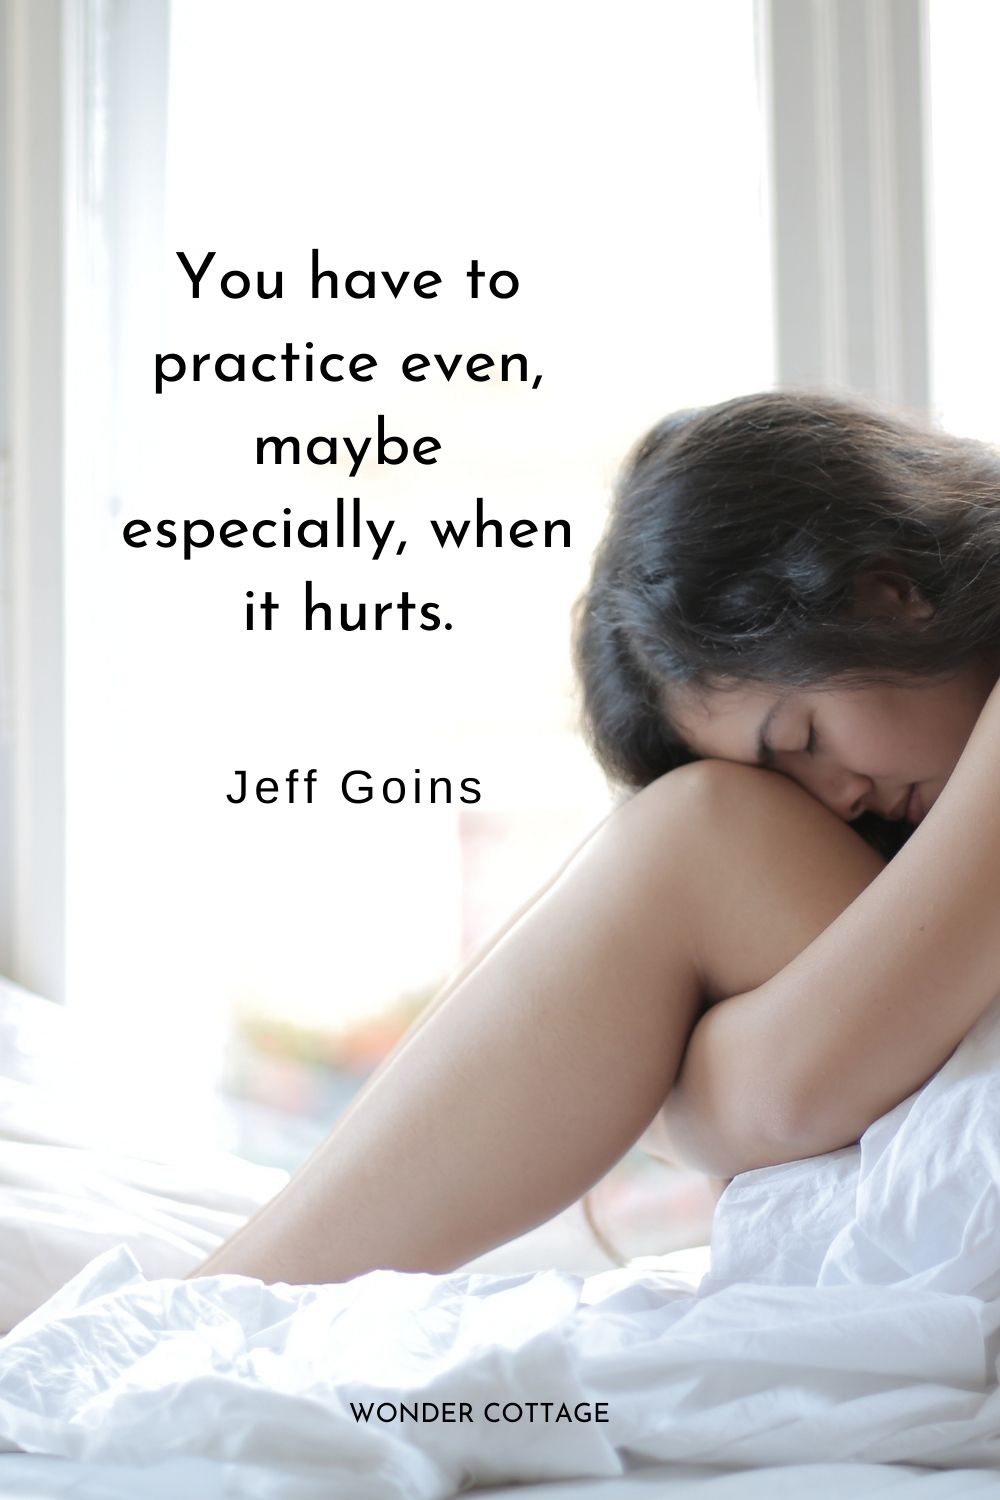 You have to practice even, maybe especially, when it hurts.  Jeff Goins